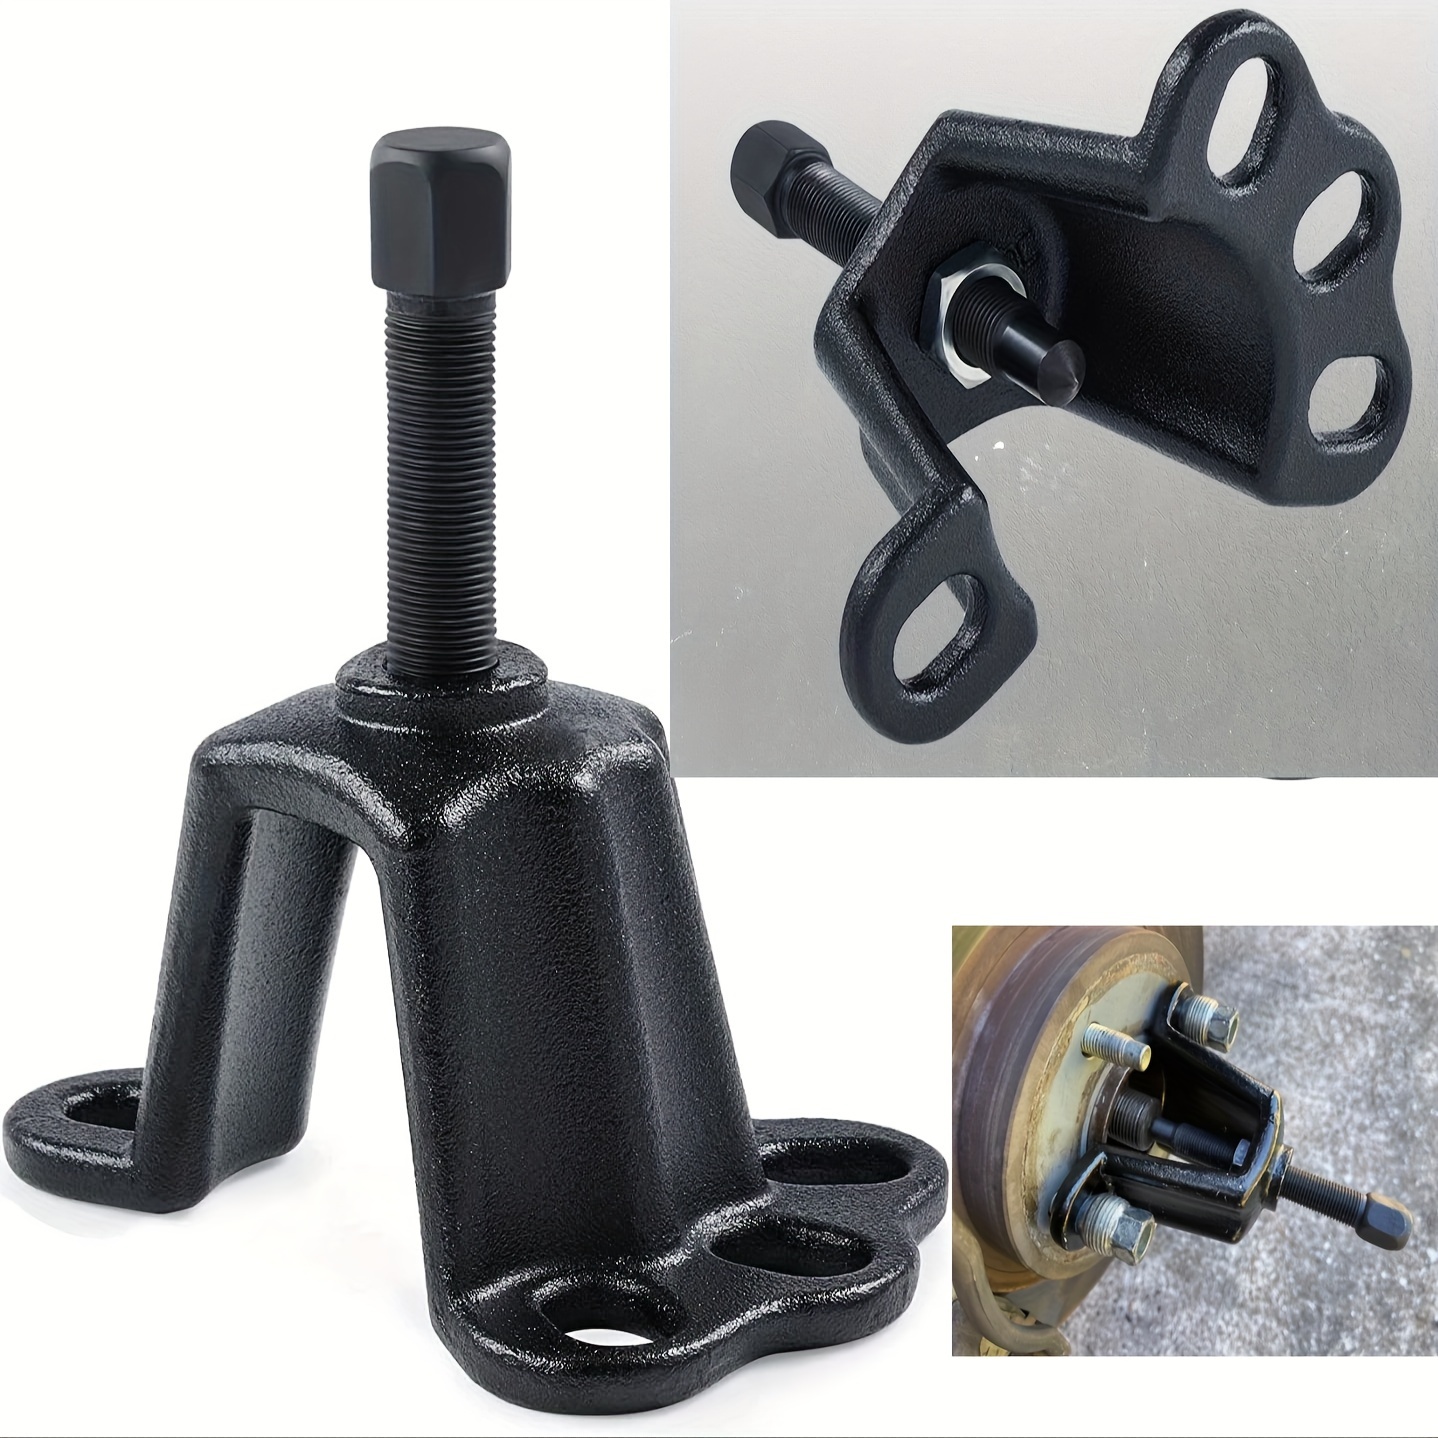 

Universal Fwd Axle & Front Wheel Puller - Flange Type Tool, Power Steering Pulley Remover, Heavy-duty Forcing Bolt, Strong And Sturdy Material, Auto Puller Tool For 3-3/4 To 4-1/2 Inches